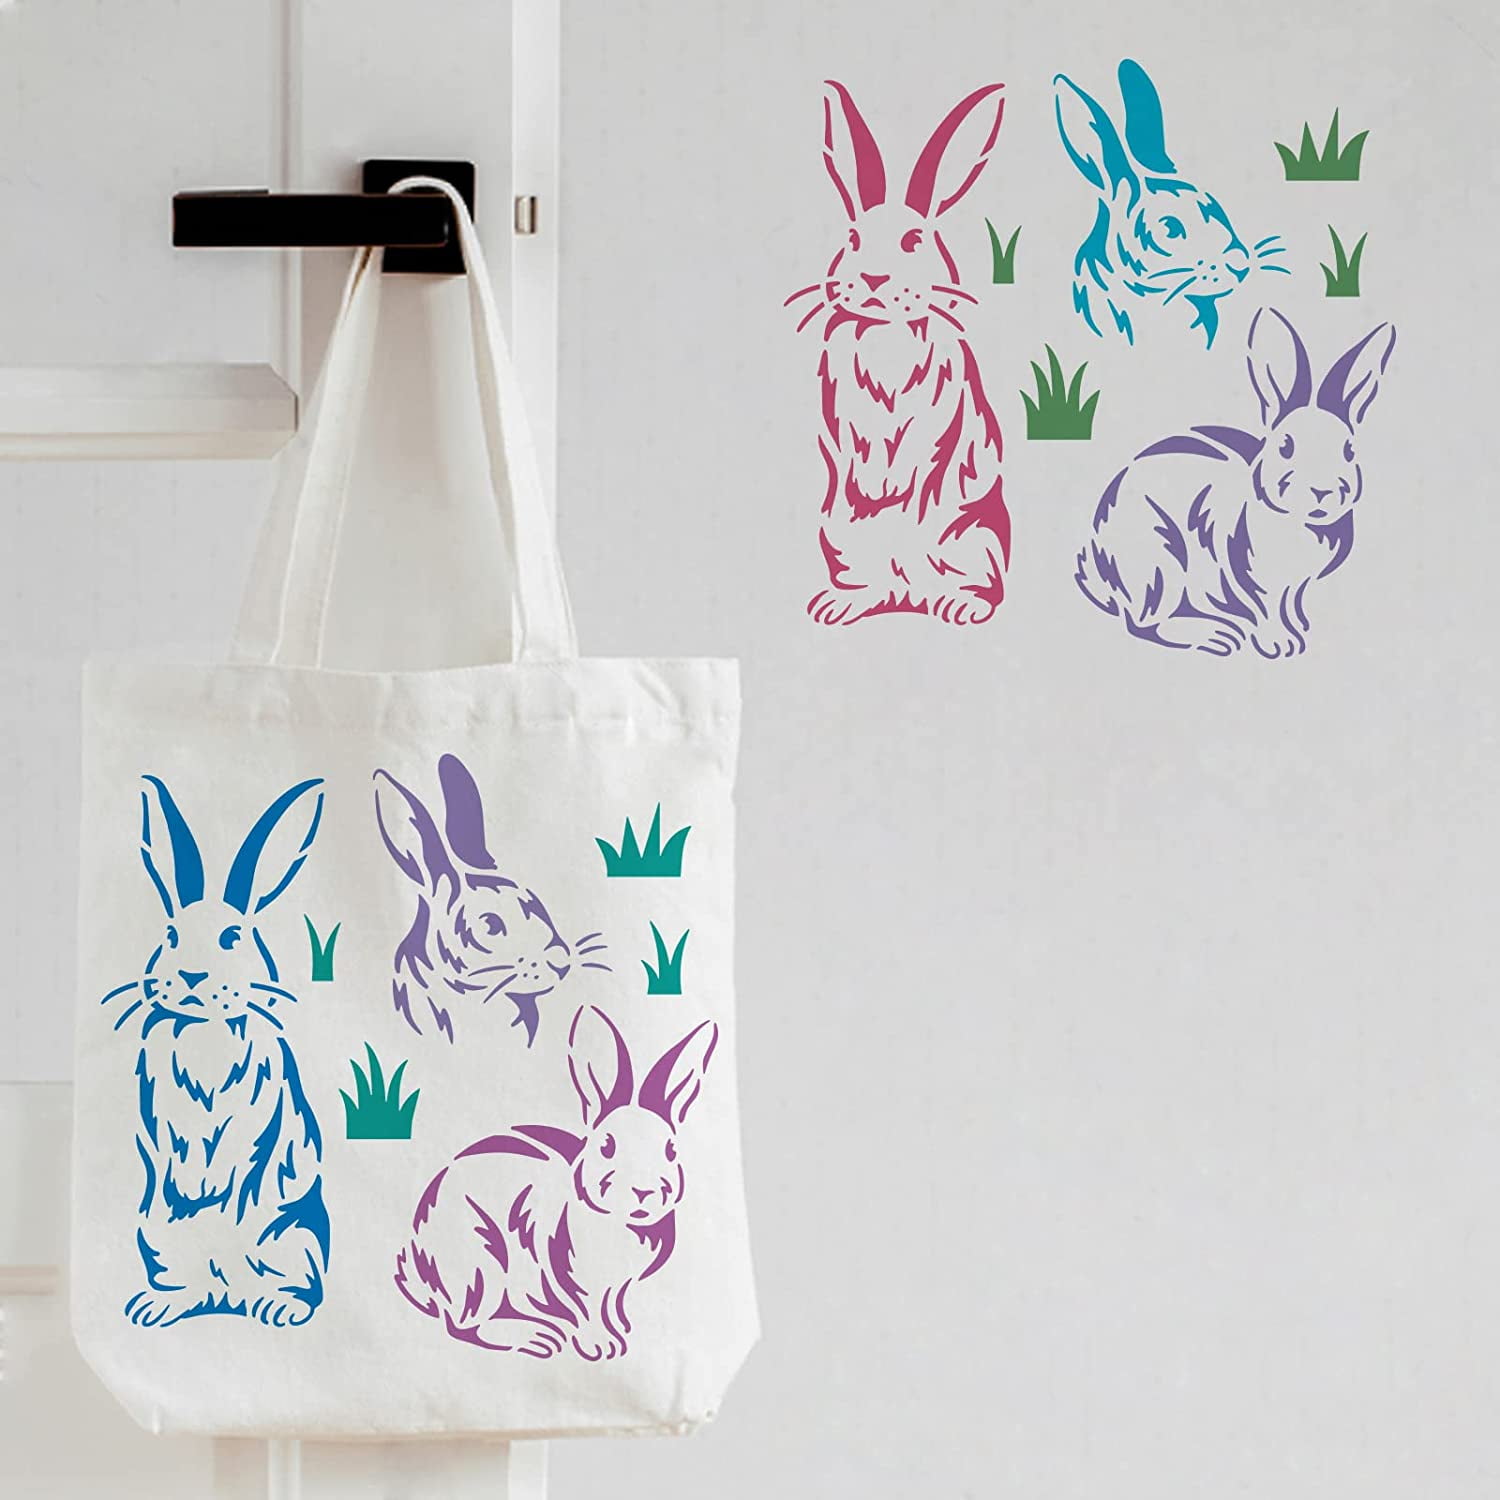 24Pcs 3x3 Inch Small Easter Stencils for Painting on Wood,Include  Carrot/Egg/Peeps/Bunny Stencils for DIY Crafts Ornaments